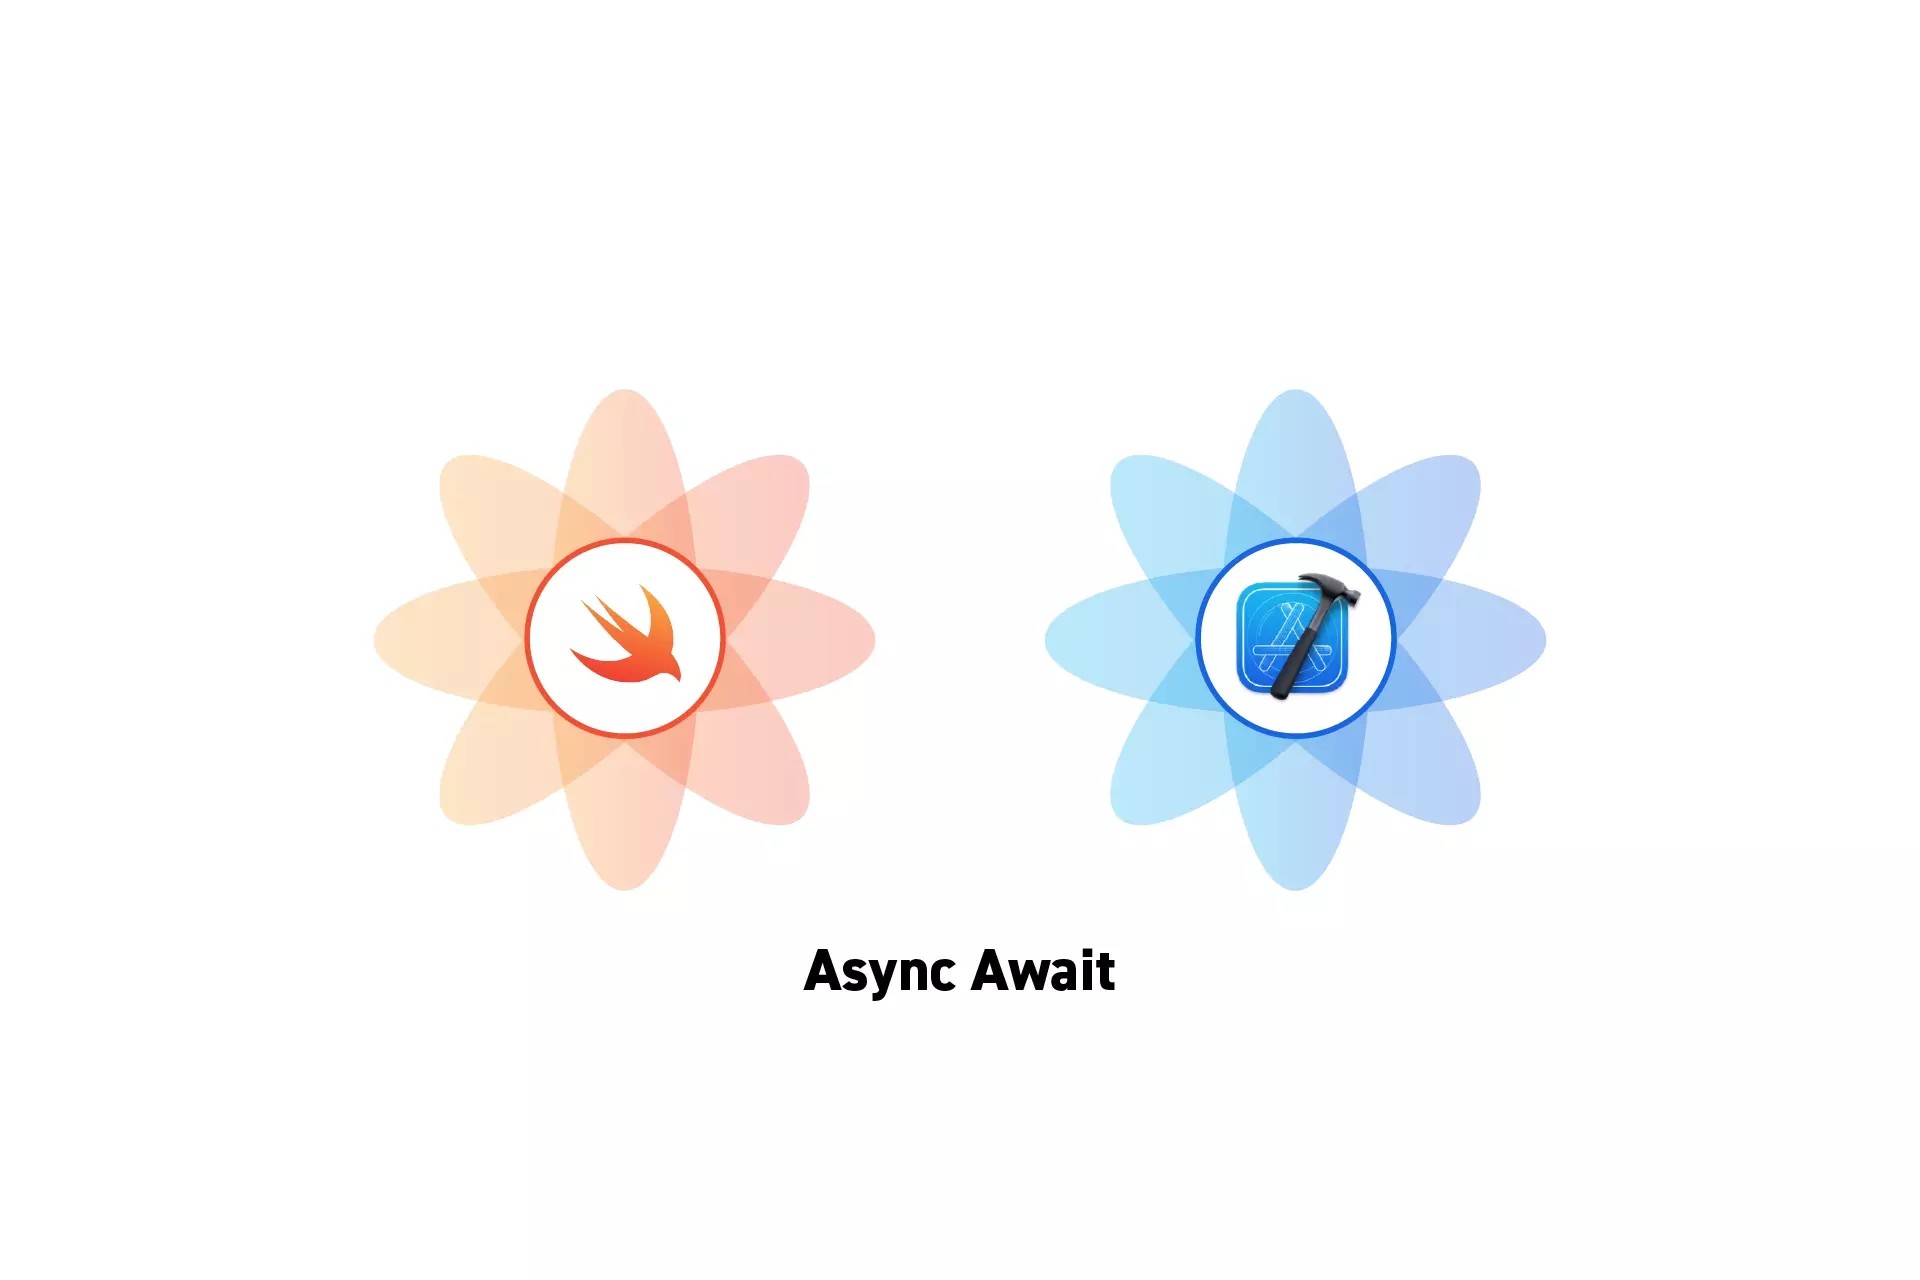 Two flowers representing Swift and Xcode. Beneath them sits the text "Async Await."